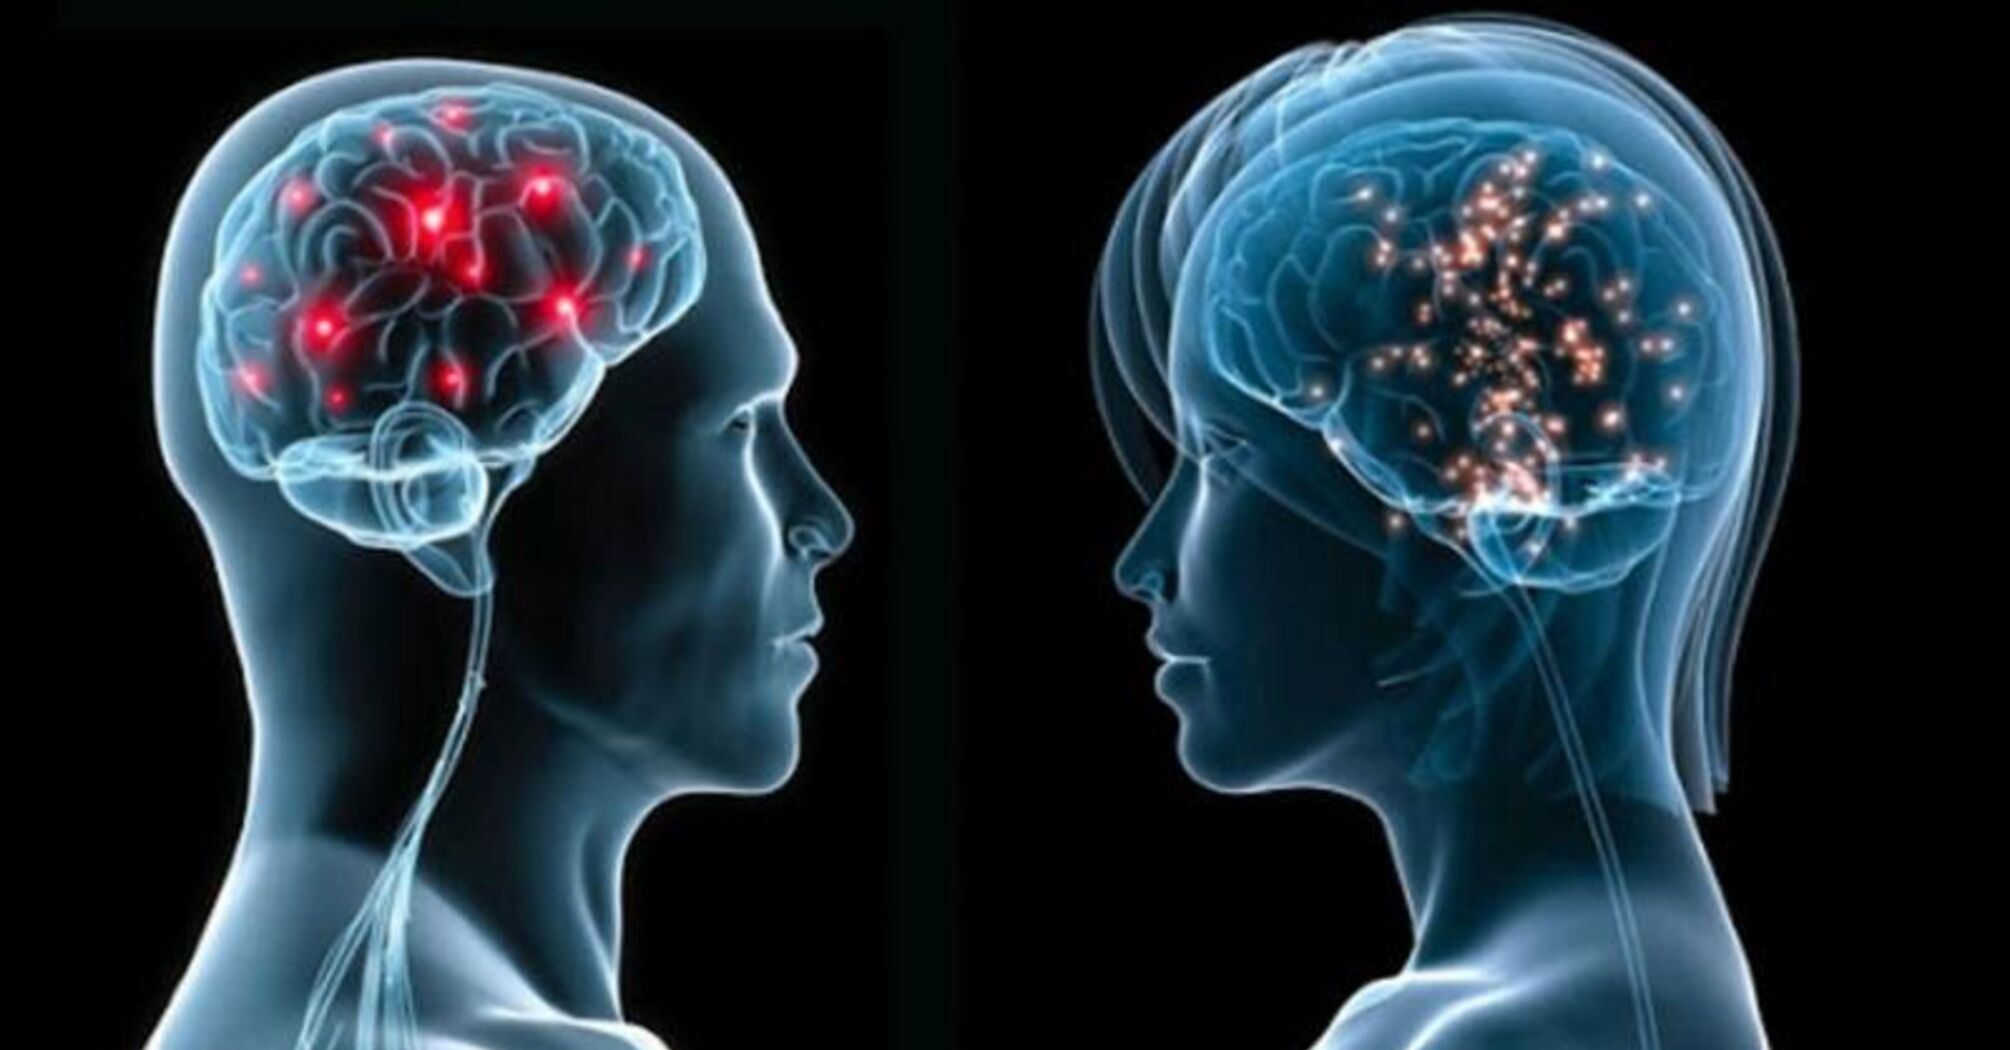 Scientists have found out the differences between male and female brains